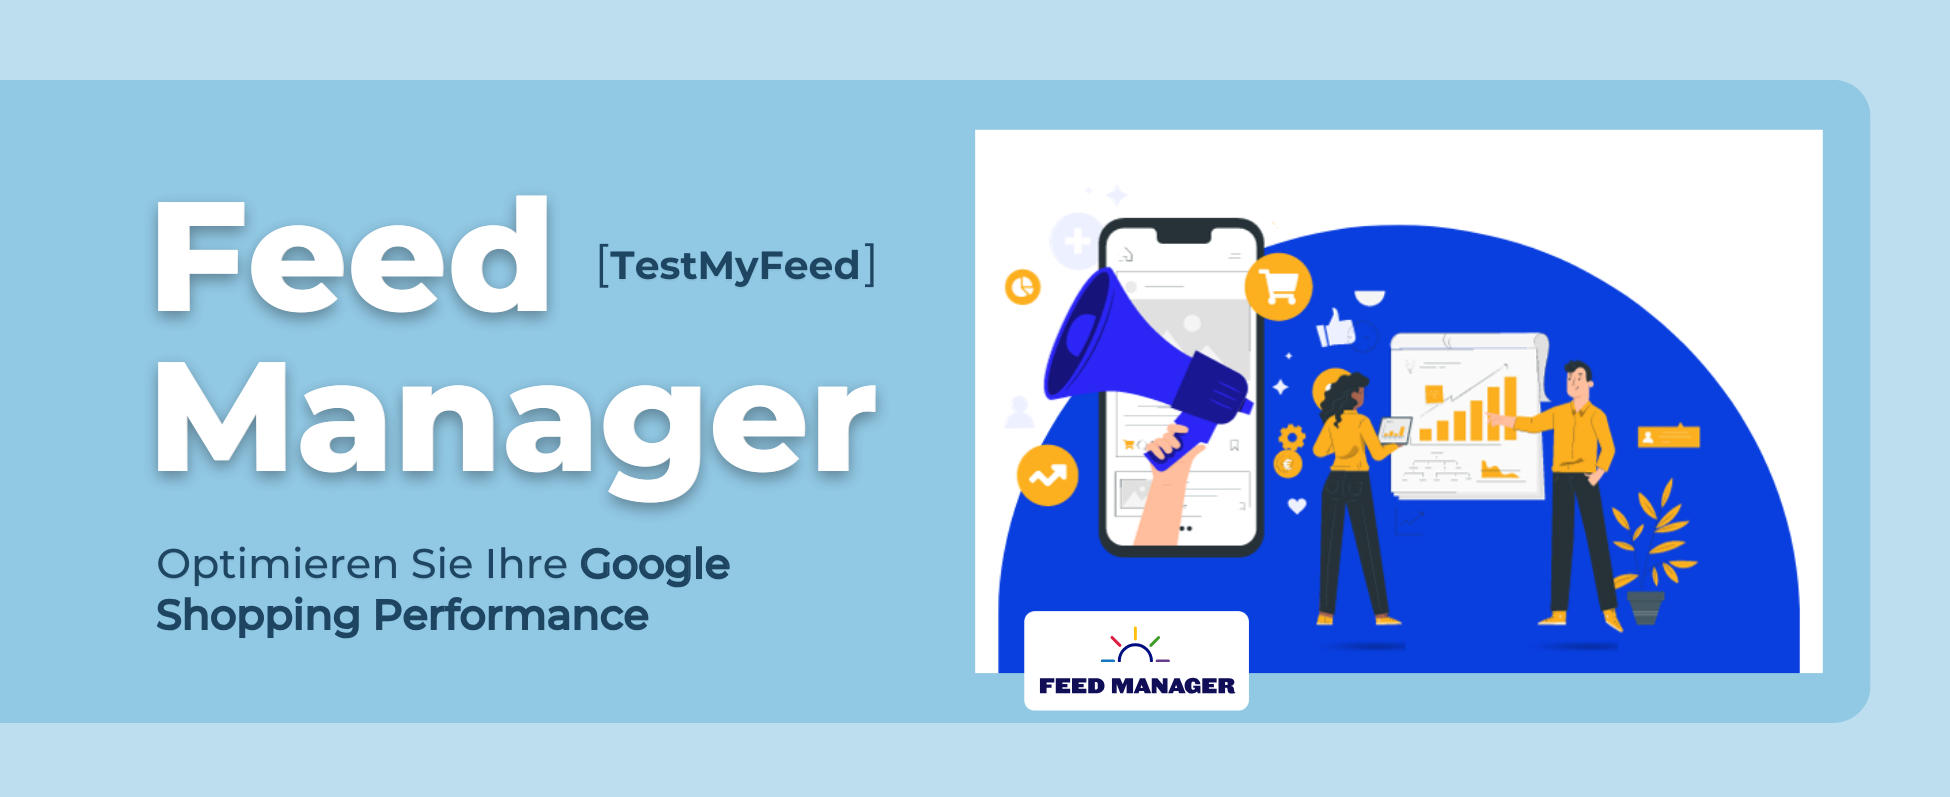 Feed Management: Unser Google Shopping Feed-Test-Tool